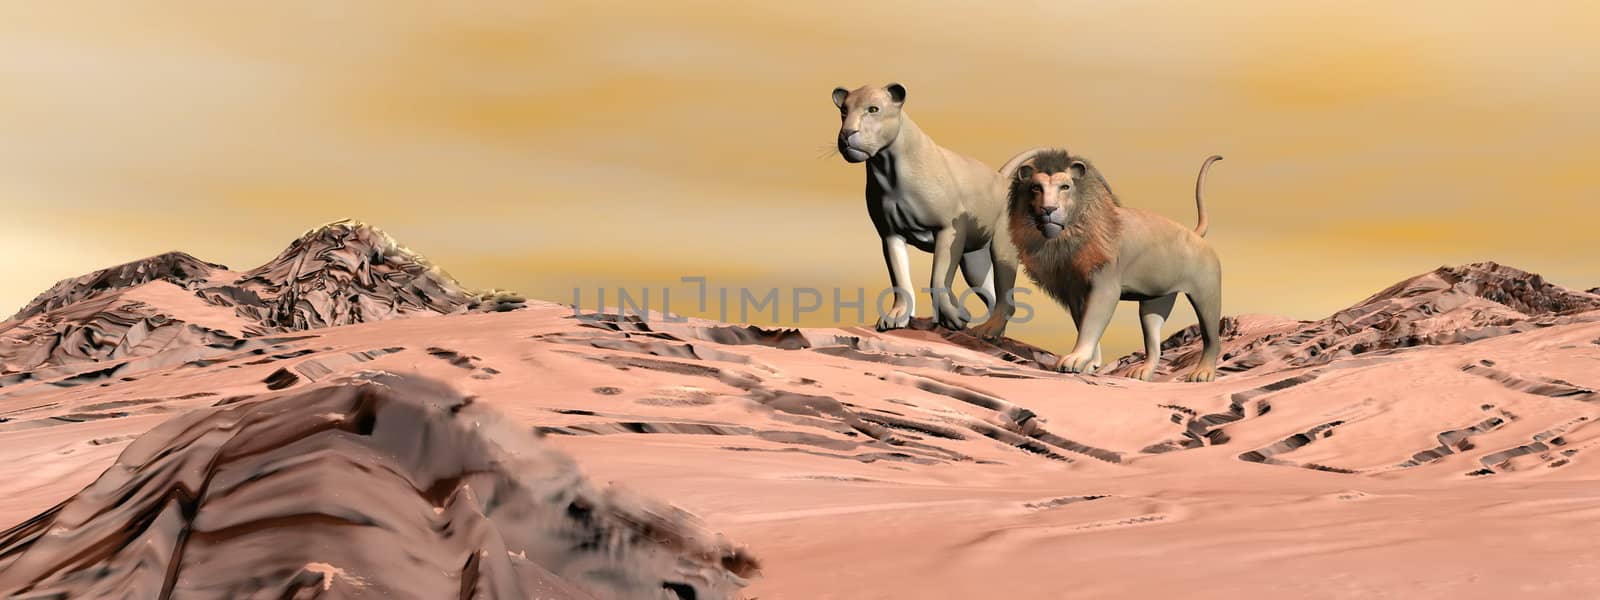 Couple of lions standing in the desert by sunset light